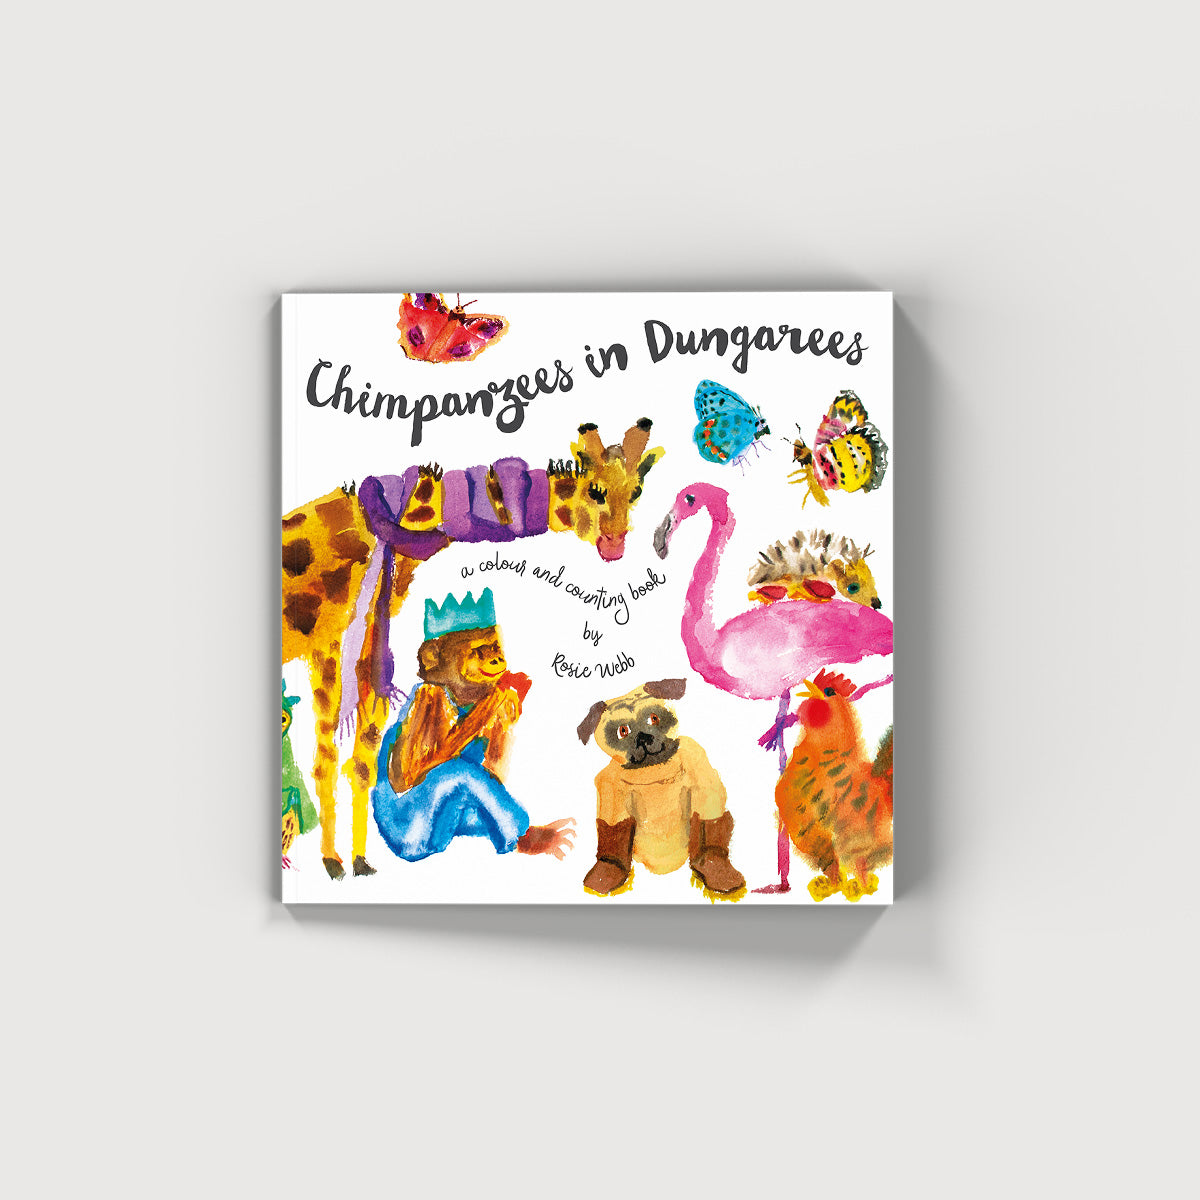 ''Chimpanzees in Dungarees'' book with watercolour animals on the cover